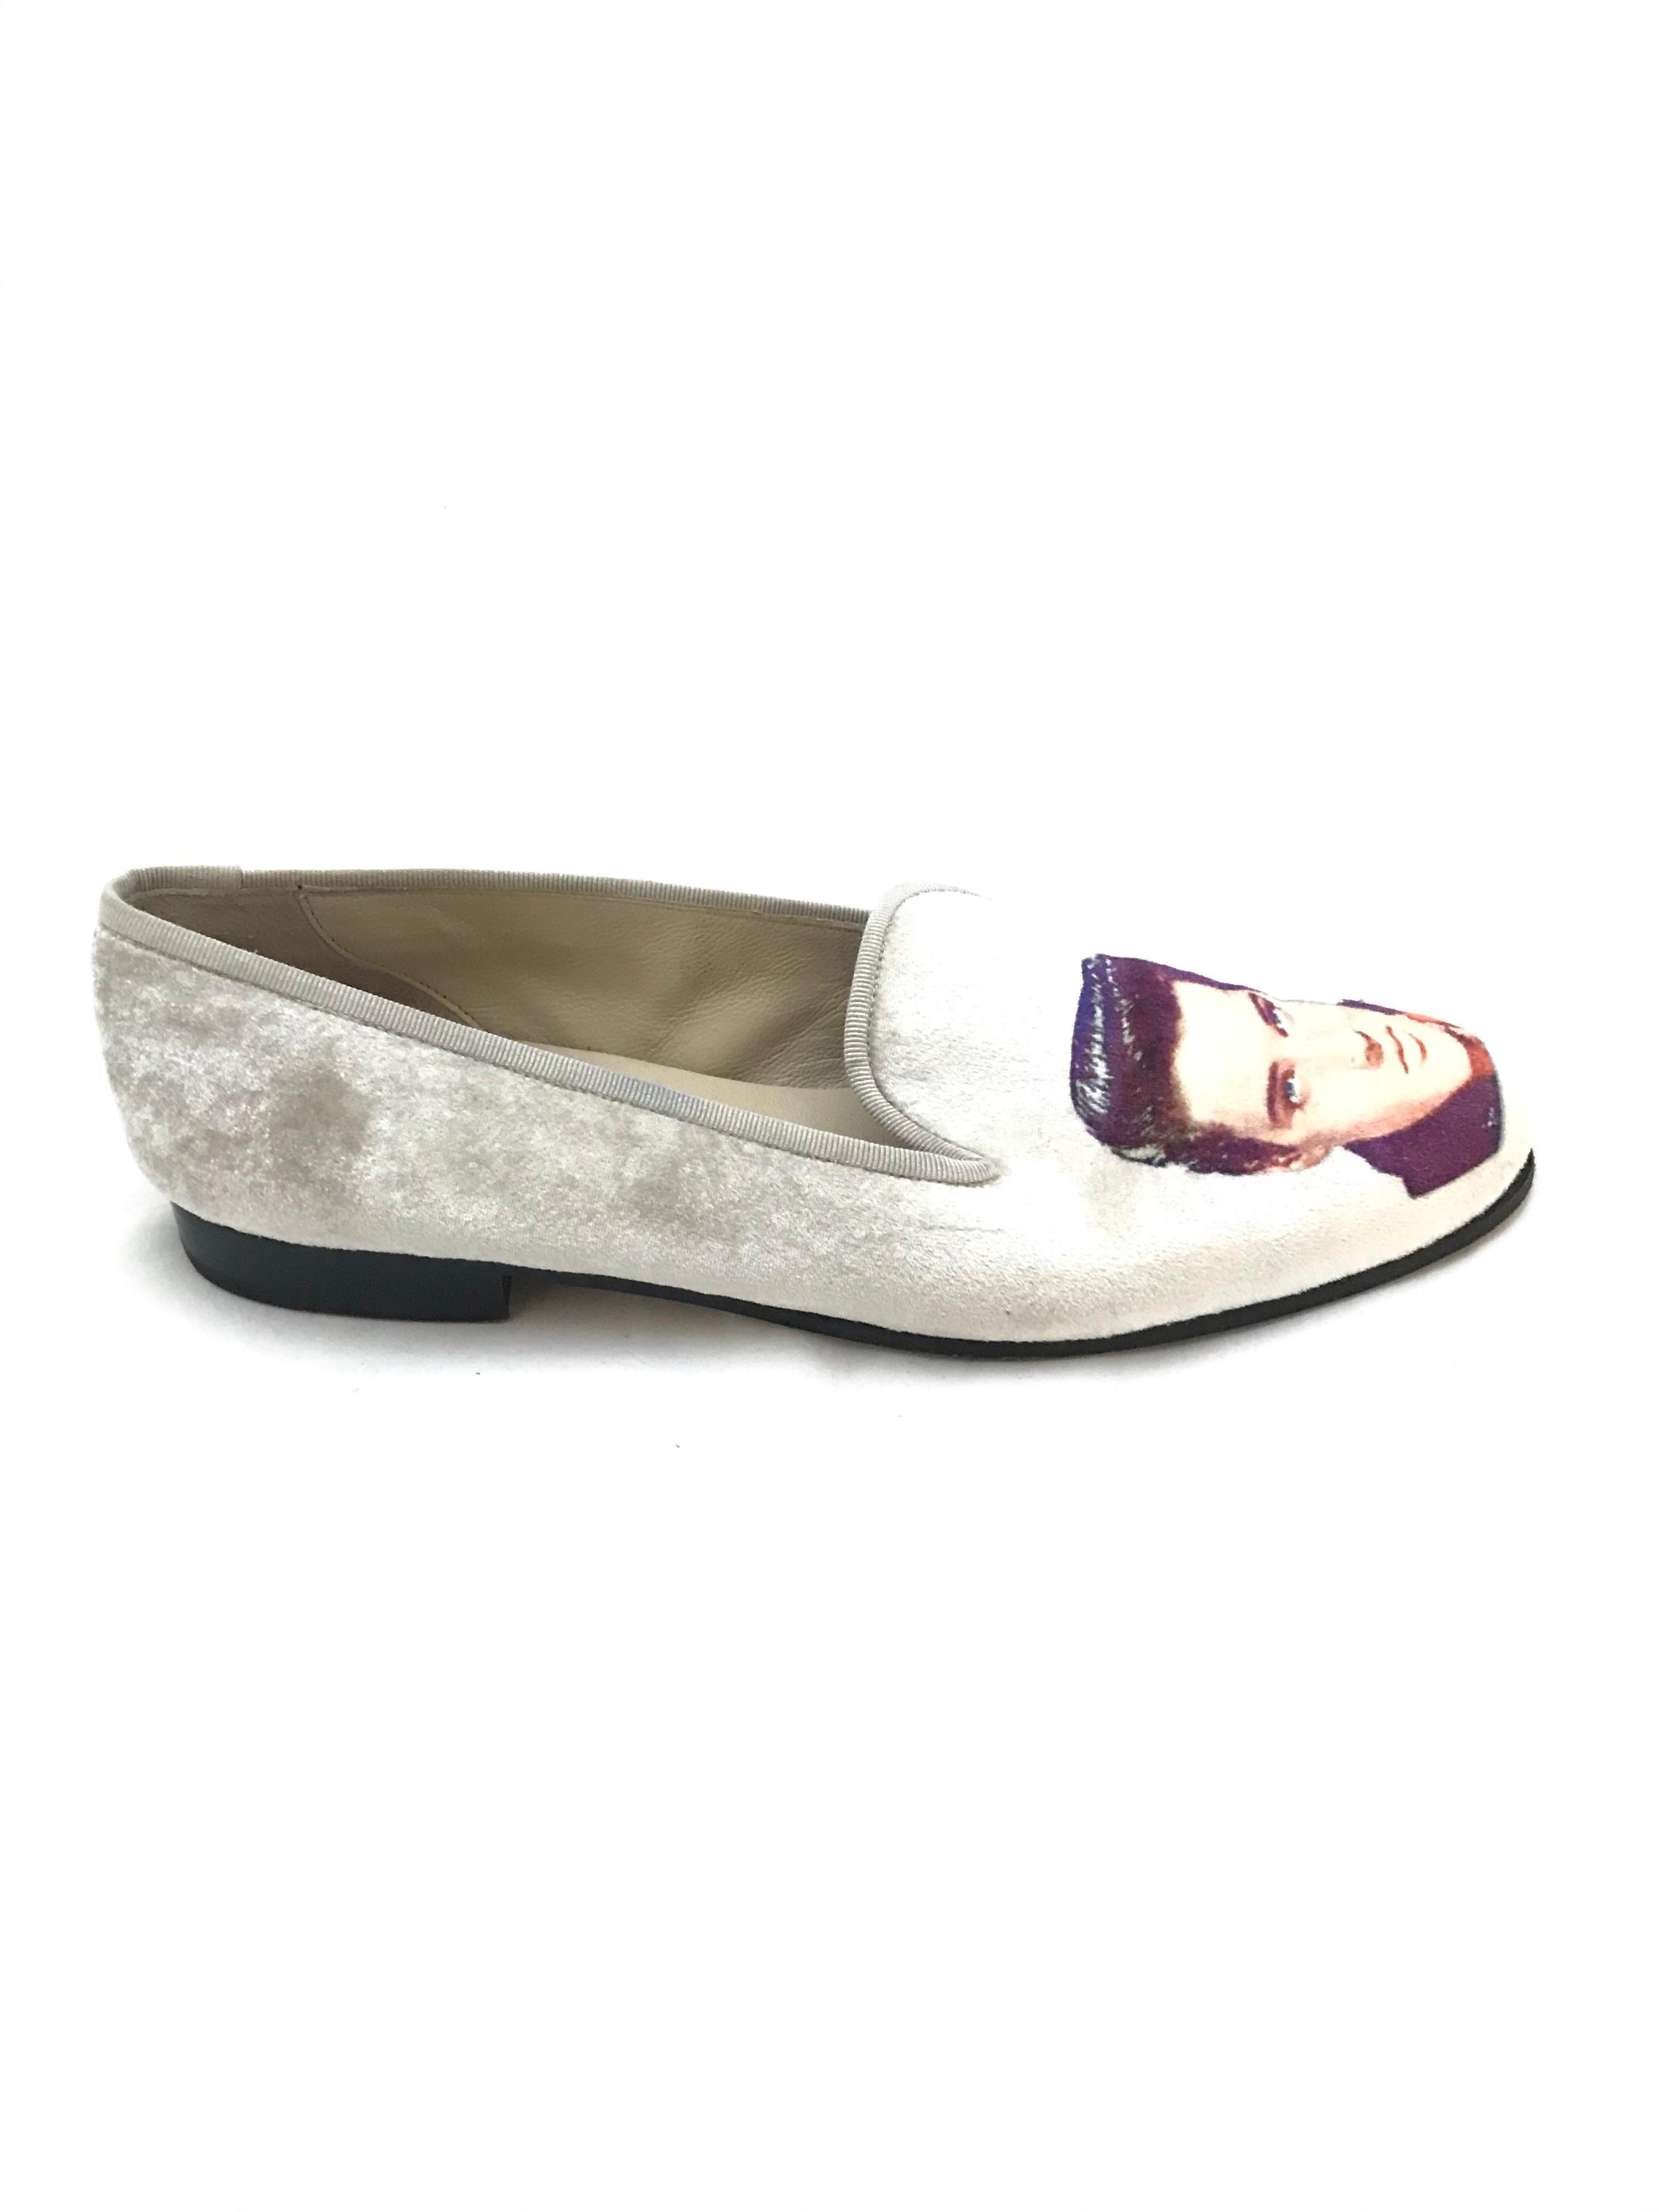 Stubbs and Wootton Vintage Elvis Slippers In Good Condition For Sale In Glasgow, GB